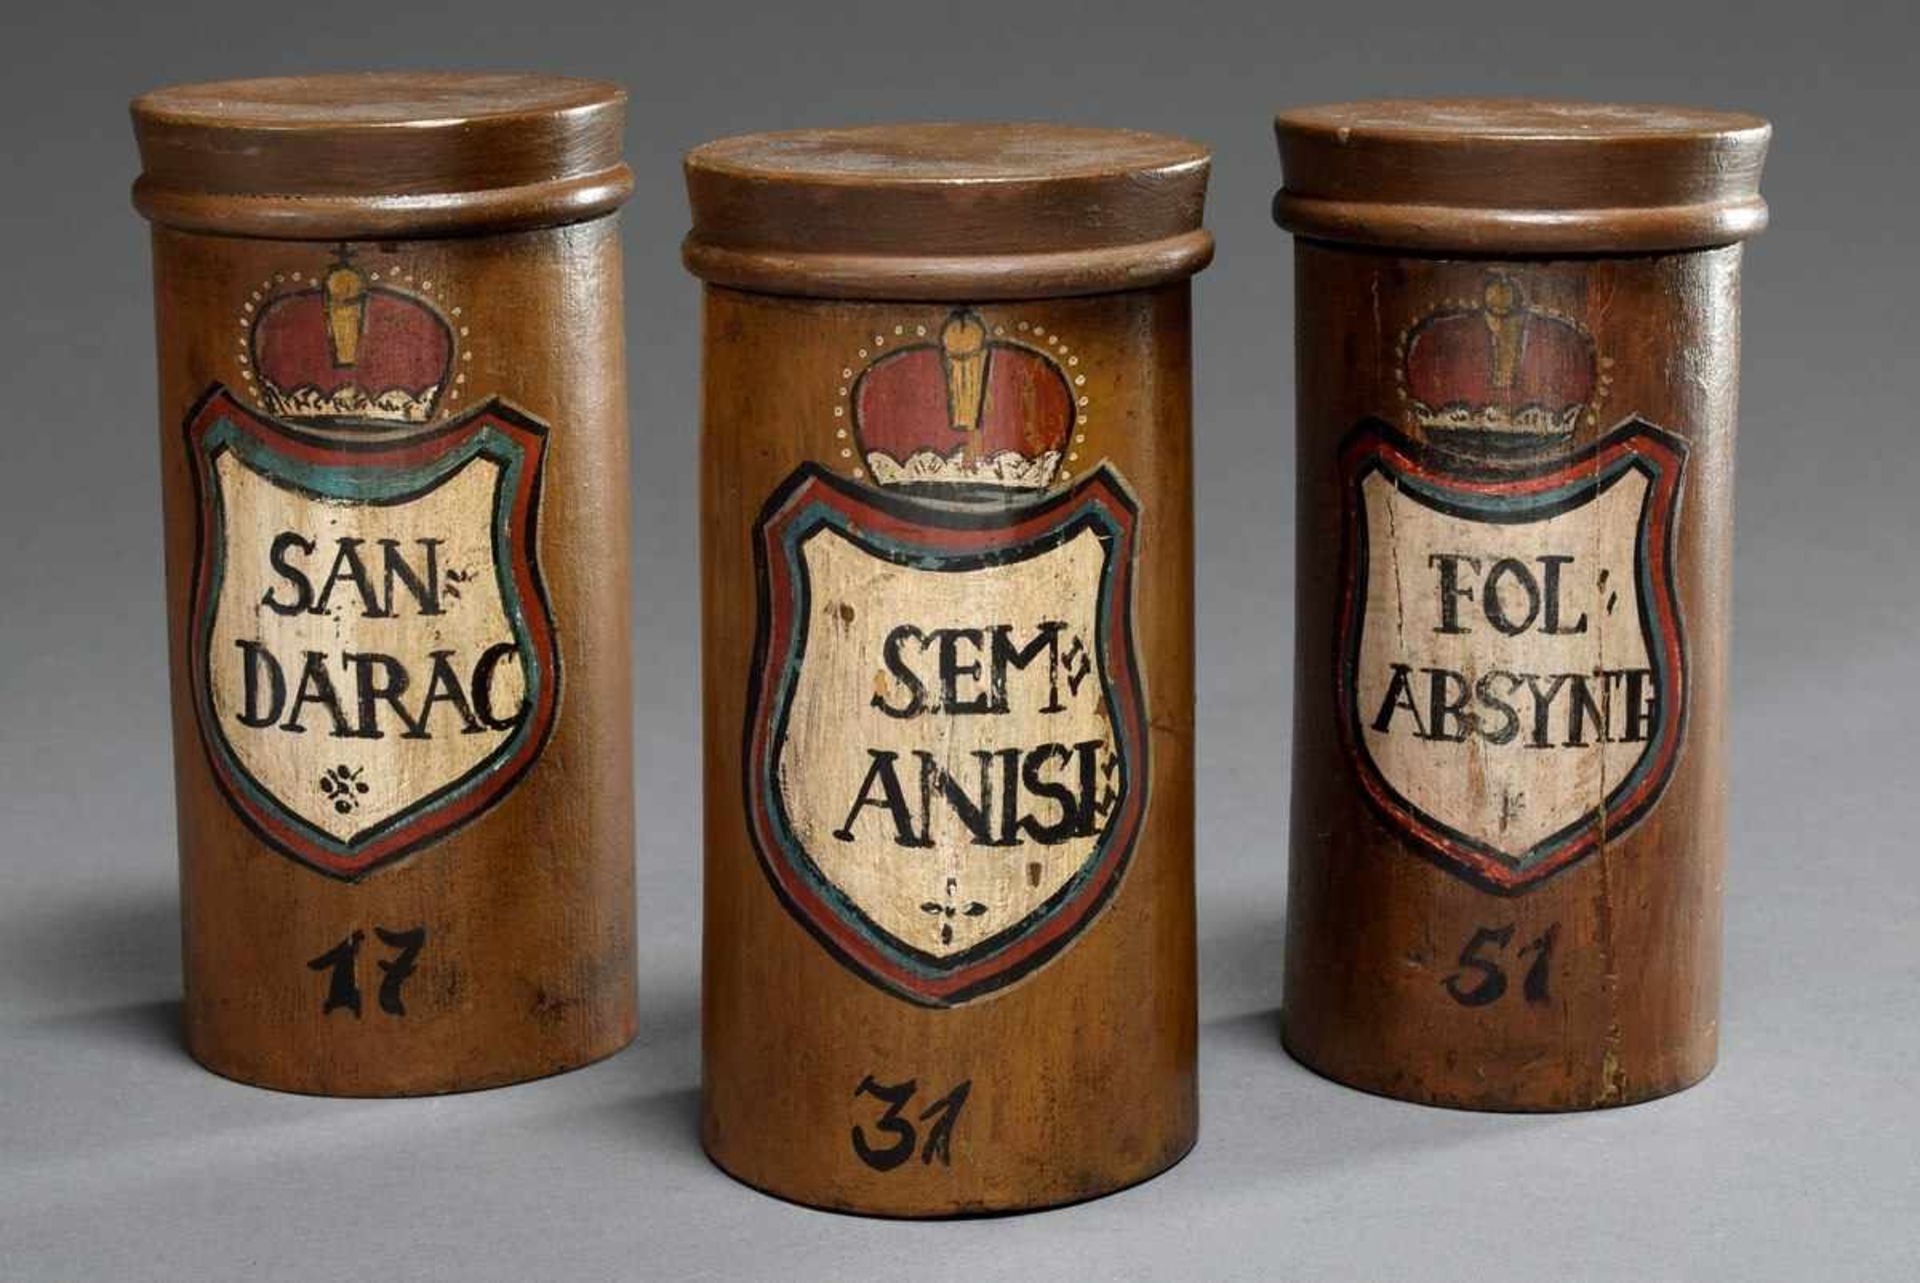 3 Various antique wooden pharmacist's lidded vessels with colored cartridges and inscription "Fol: